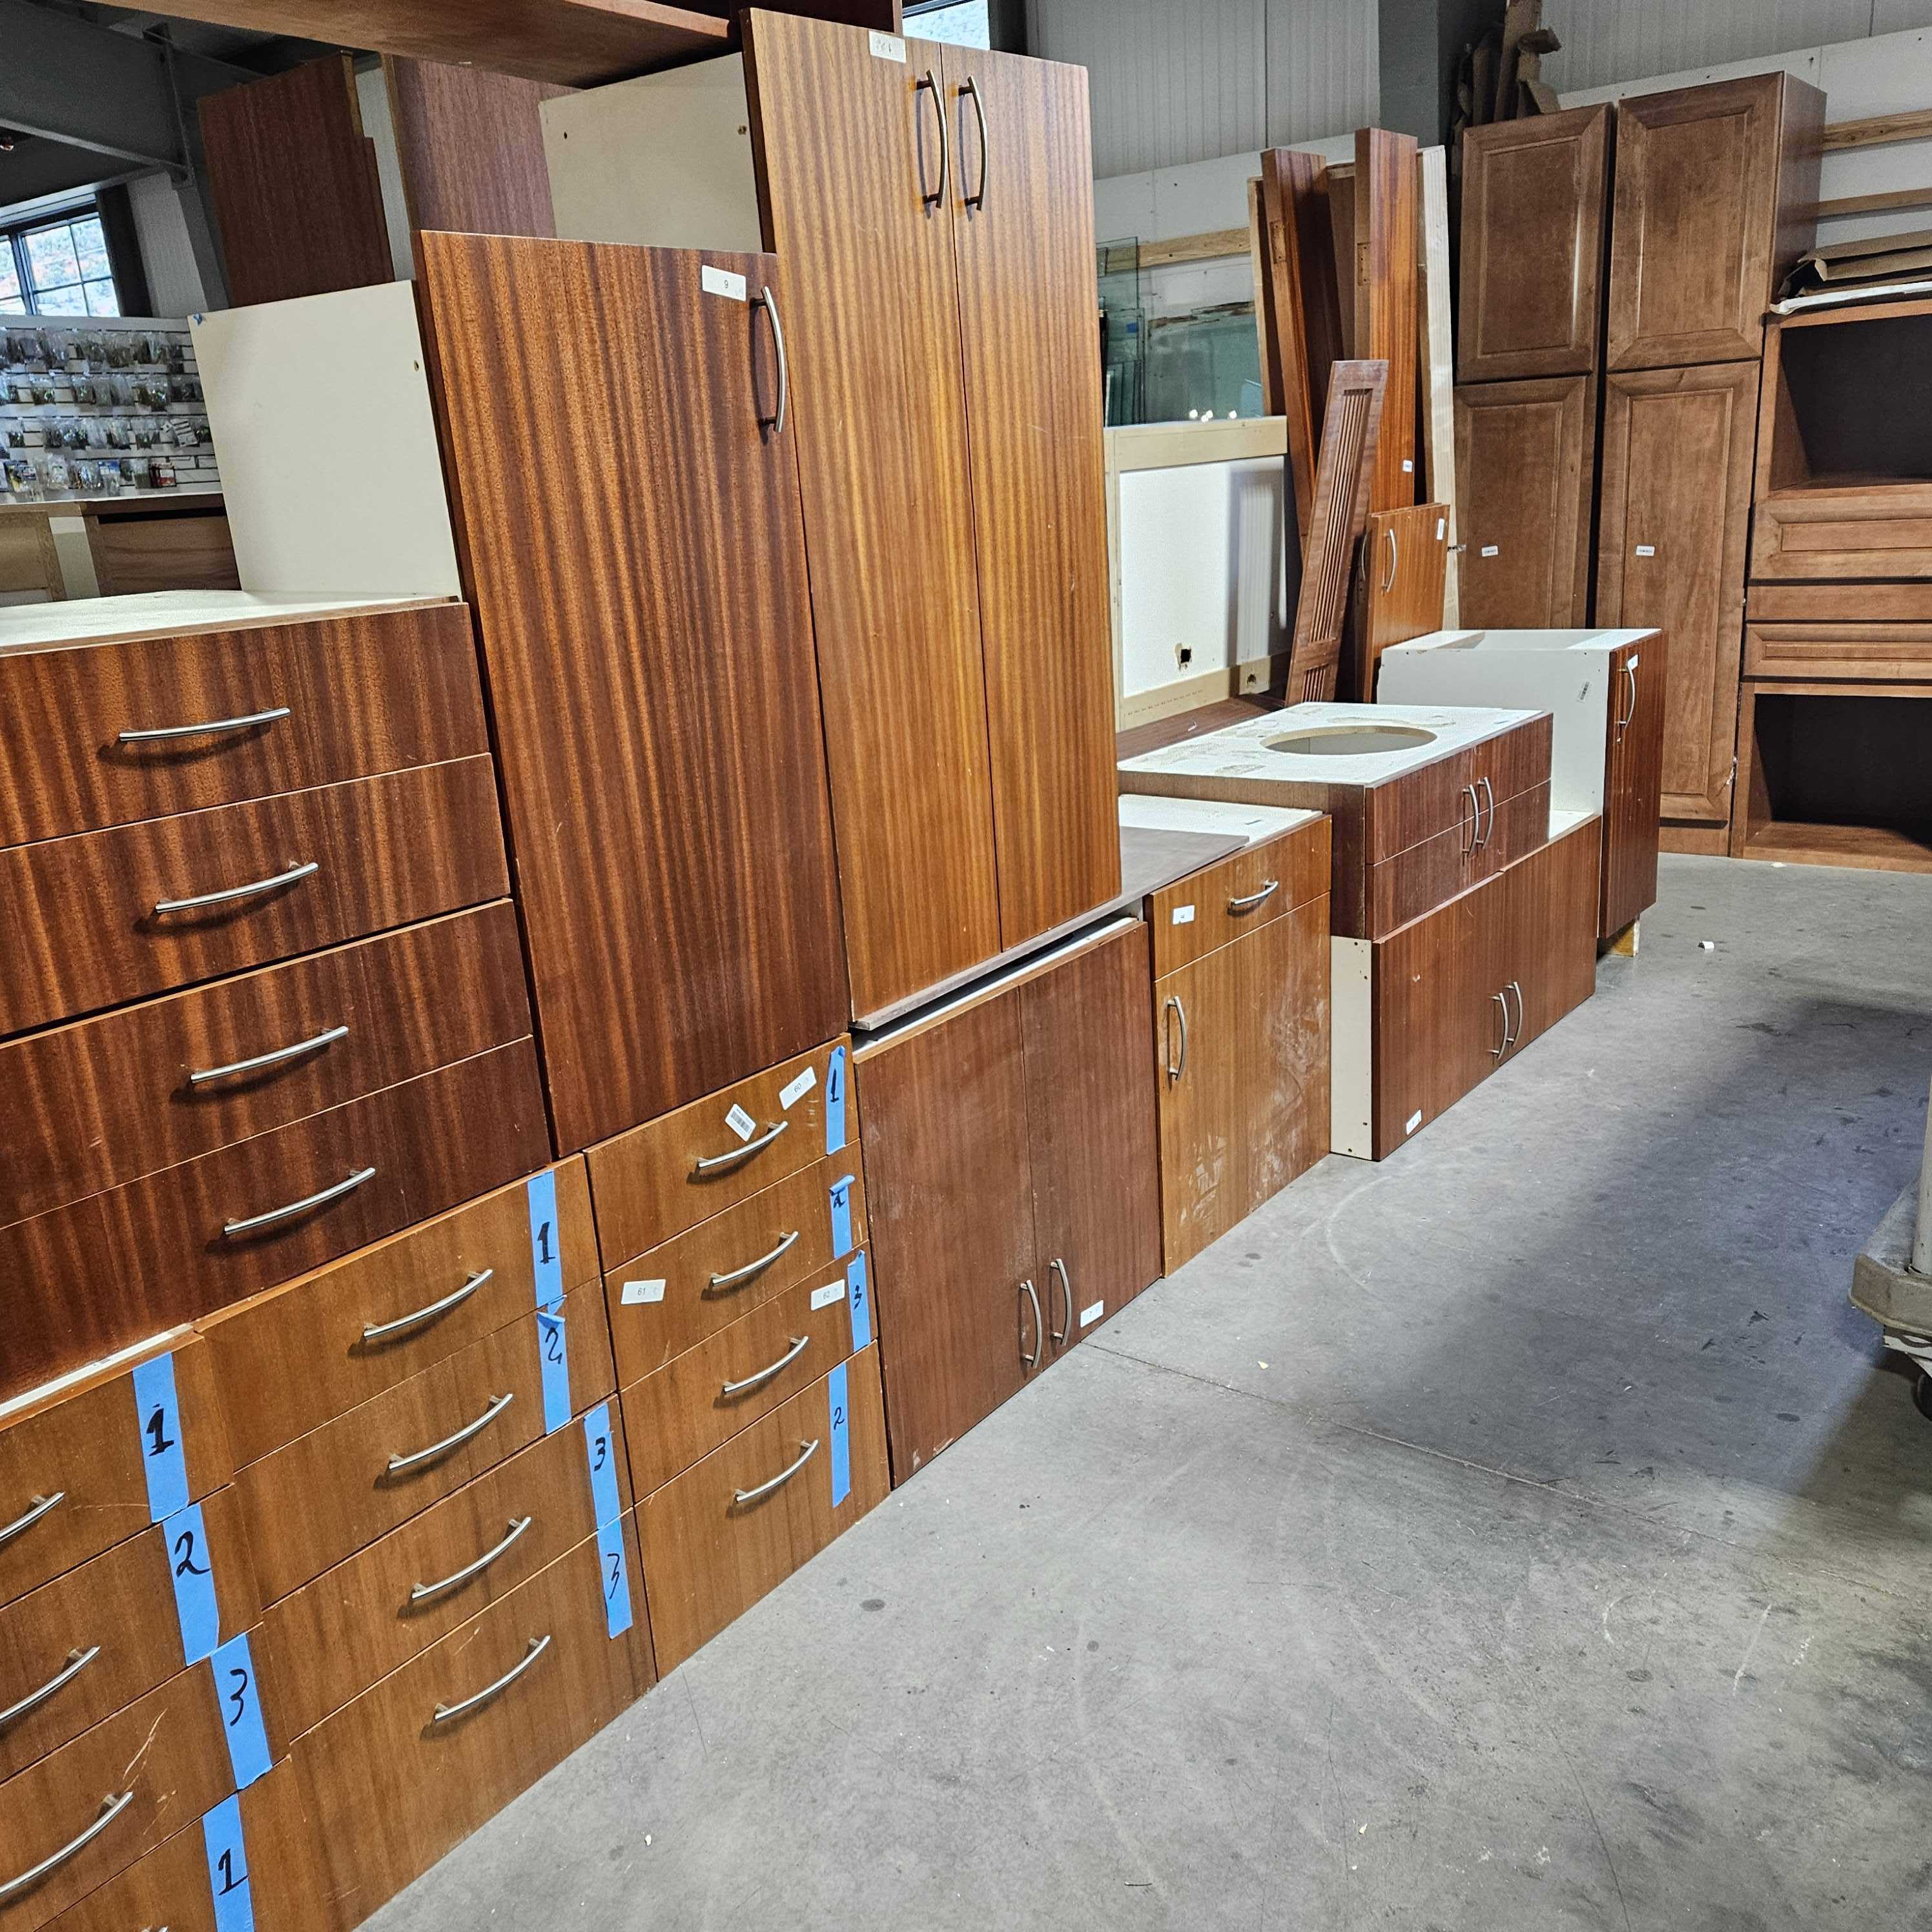 24 Piece 13 Lowers, 10 Uppers, Cubby Shelf, Wall Mount Closet Door,Walk In Pantry Doors, Side Panels Ribbon Sapele Mahogany Kitchen & Pantry Set